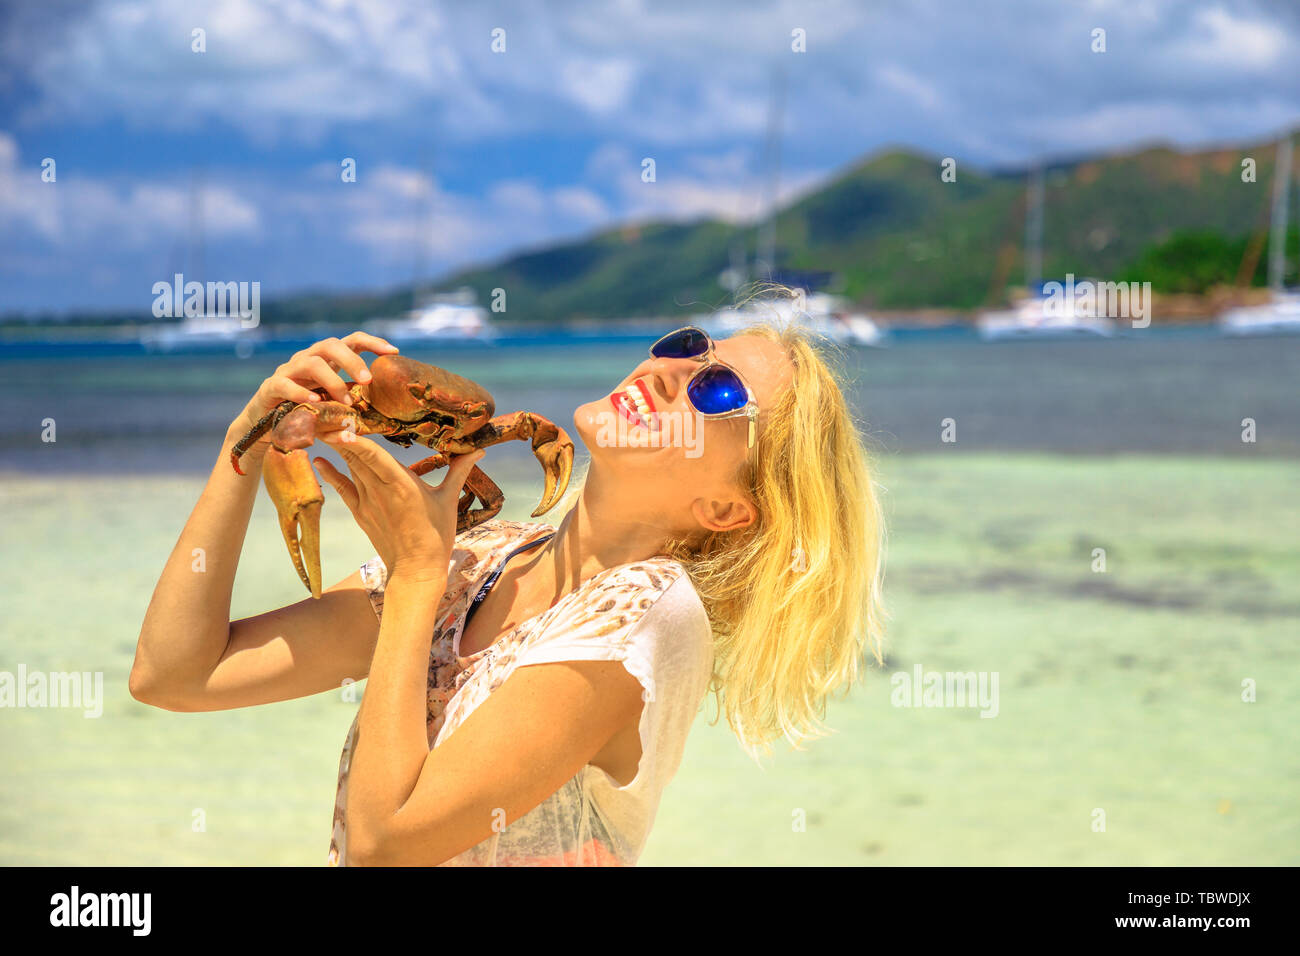 Tourism in Seychelles, Africa, Indian Ocean. Happy tourist woman holding an Ocypode Ceratophthalmus also called Ghost Crab with one claw being larger Stock Photo